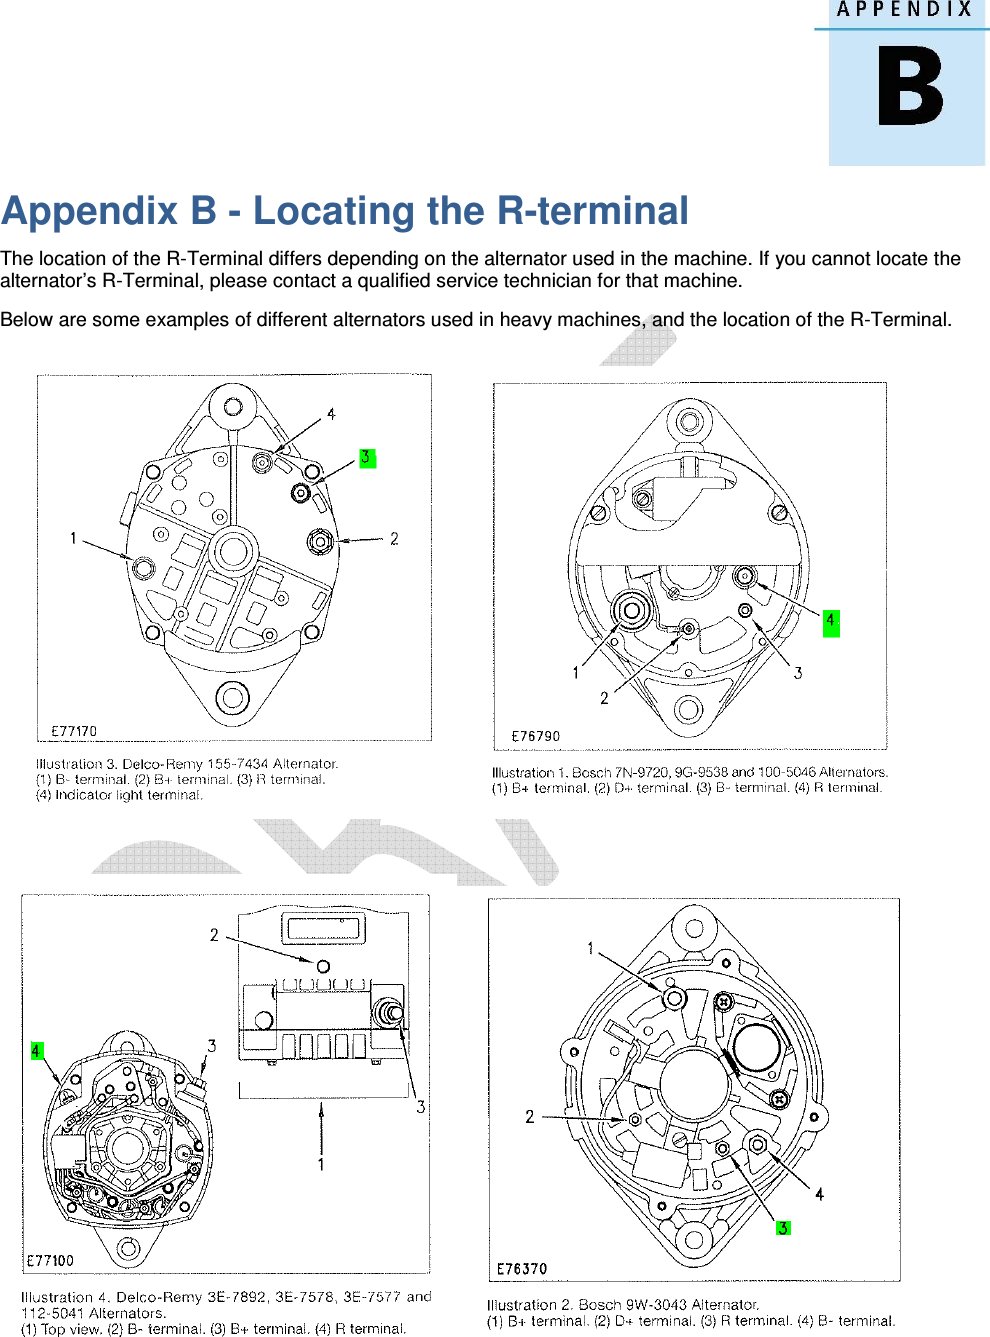   Appendix B - Locating the R-terminal The location of the R-Terminal differs depending on the alternator used in the machine. If you cannot locate the alternator’s R-Terminal, please contact a qualified service technician for that machine. Below are some examples of different alternators used in heavy machines, and the location of the R-Terminal.      